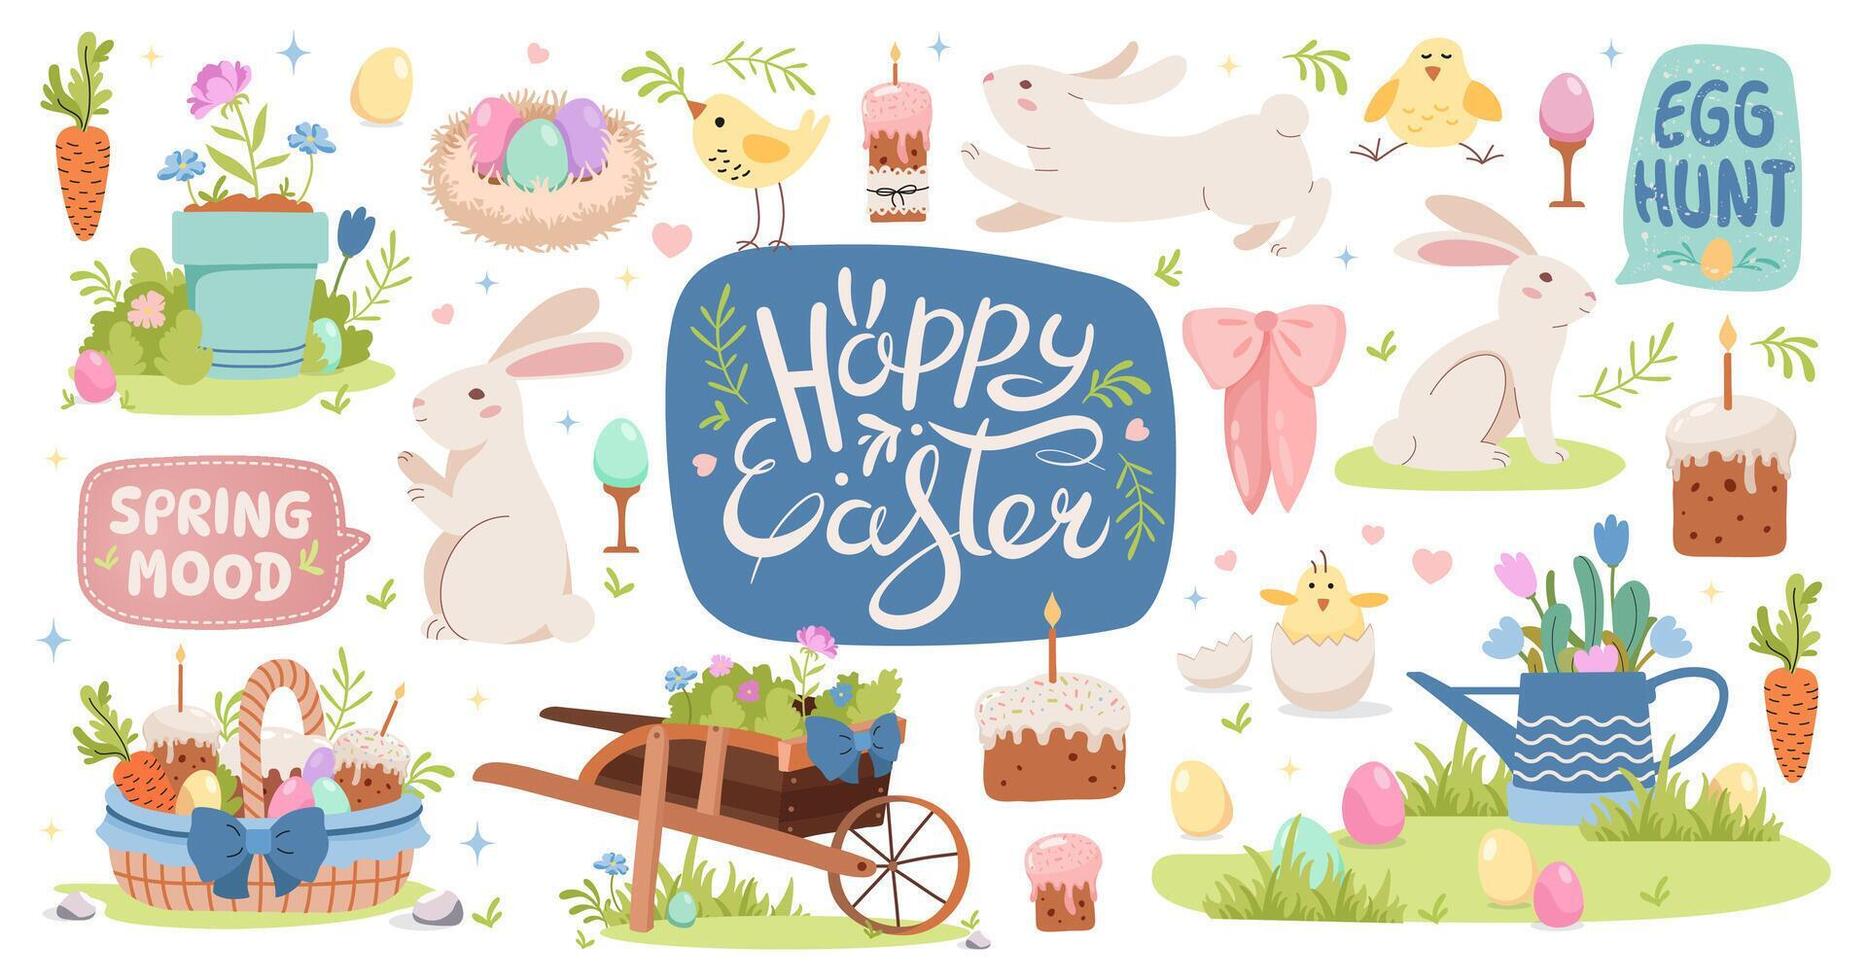 Happy Easter cartoon animal character and garden elements set. Spring Easter bunny, chickens, garden wheelbarrow, potted flower, basket with colored eggs and cake. Hand lettering. Vector illustration.